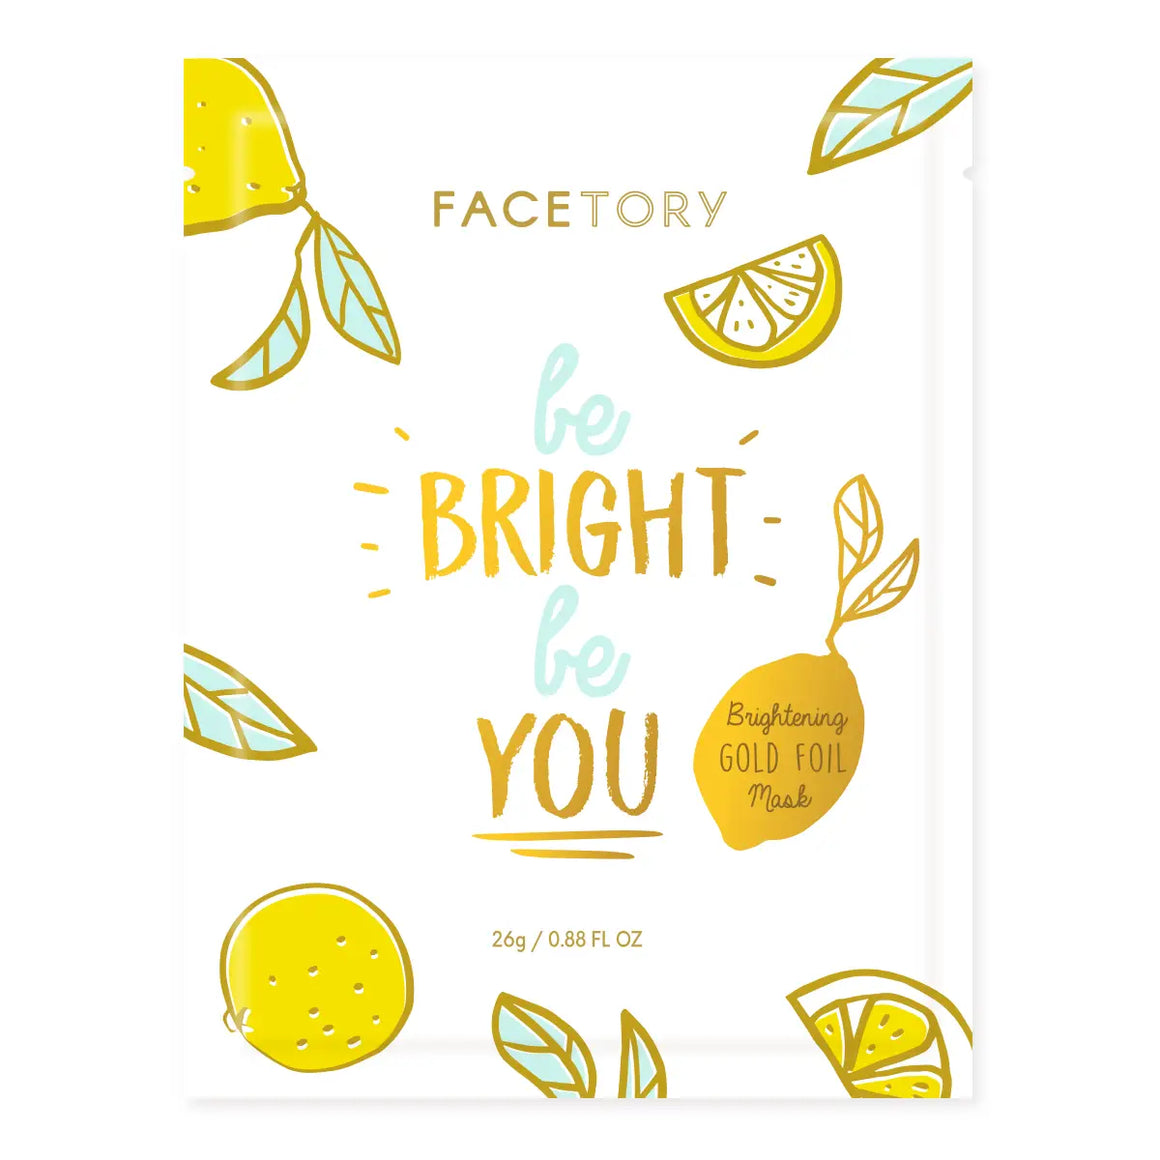 LUXURY FACE MASKS - FACETORY BE BRIGHT BE YOU GOLD FOIL